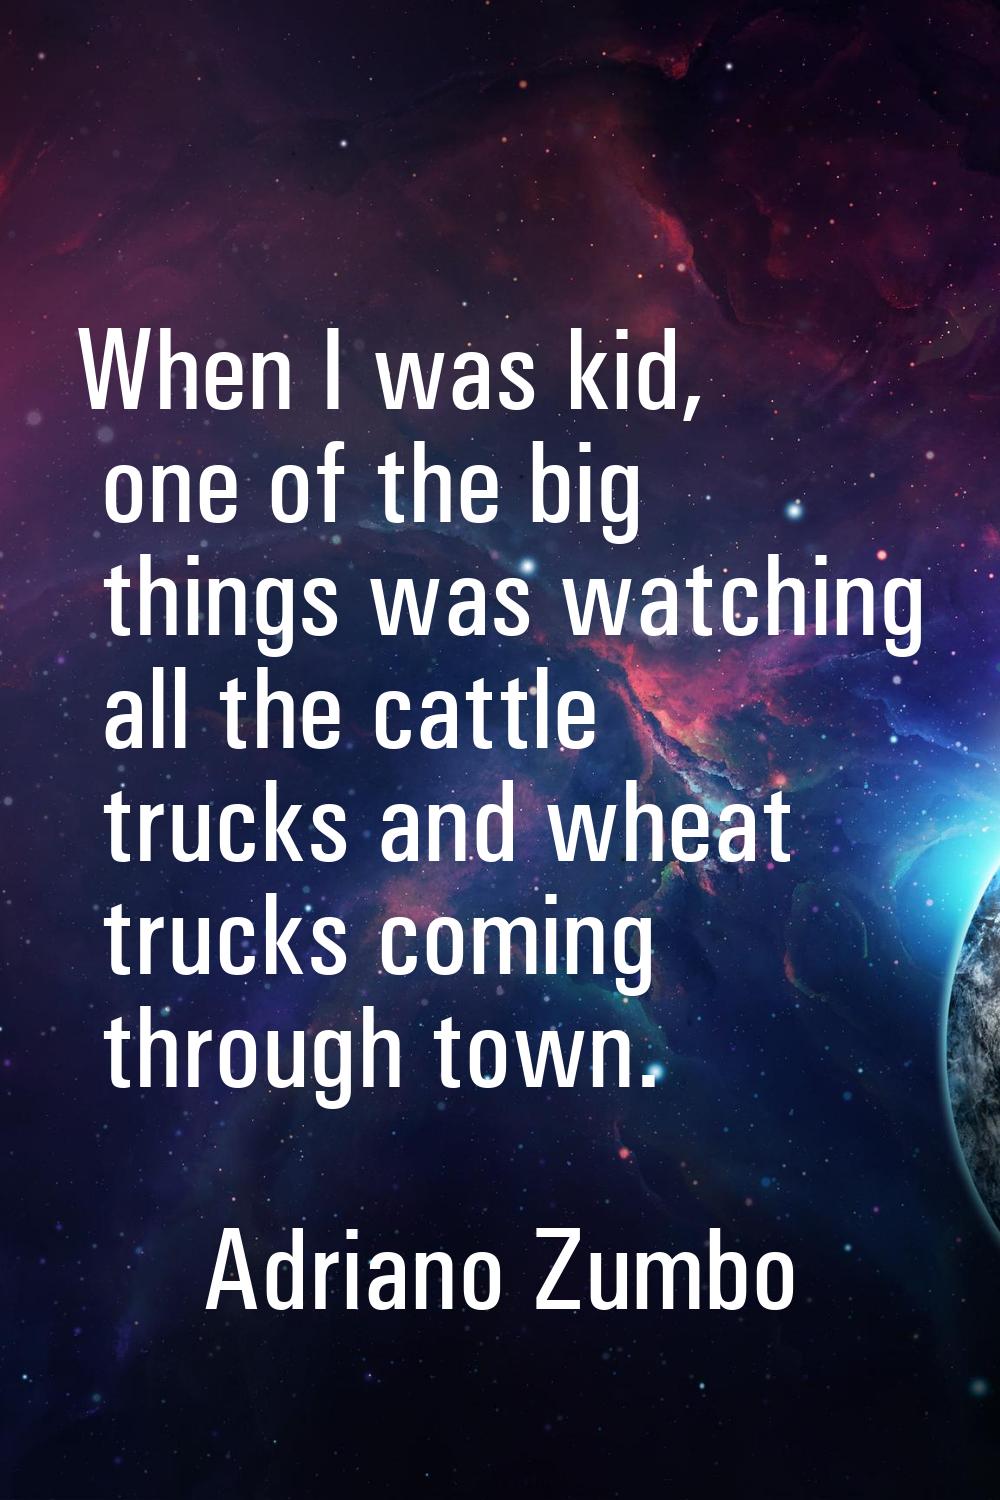 When I was kid, one of the big things was watching all the cattle trucks and wheat trucks coming th